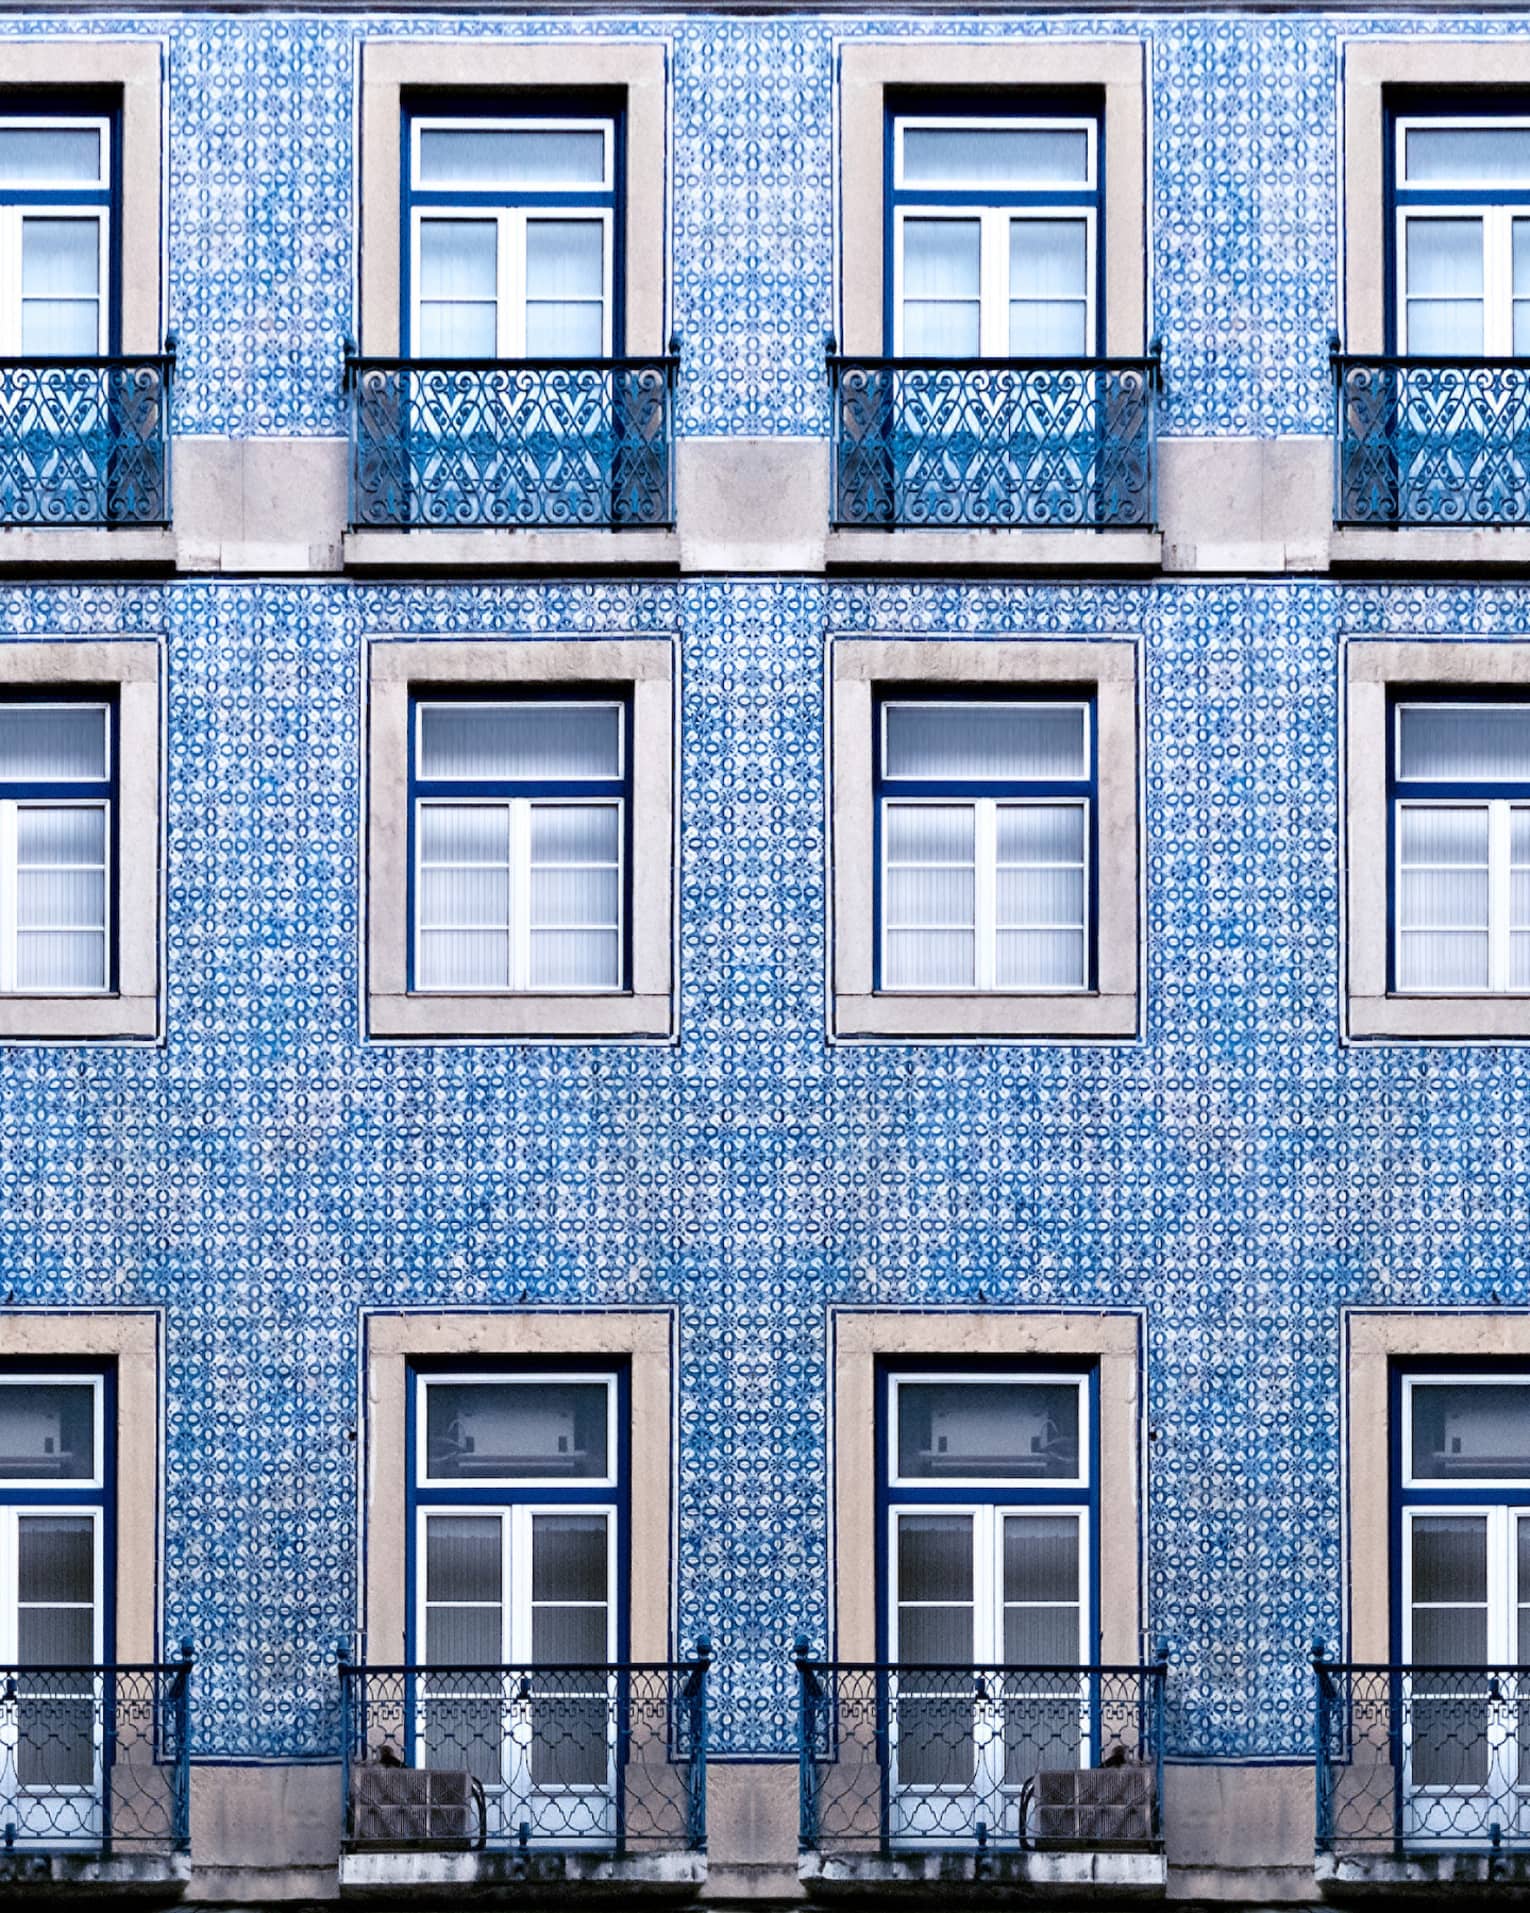 A blue tiled wall with many windows and balconies.